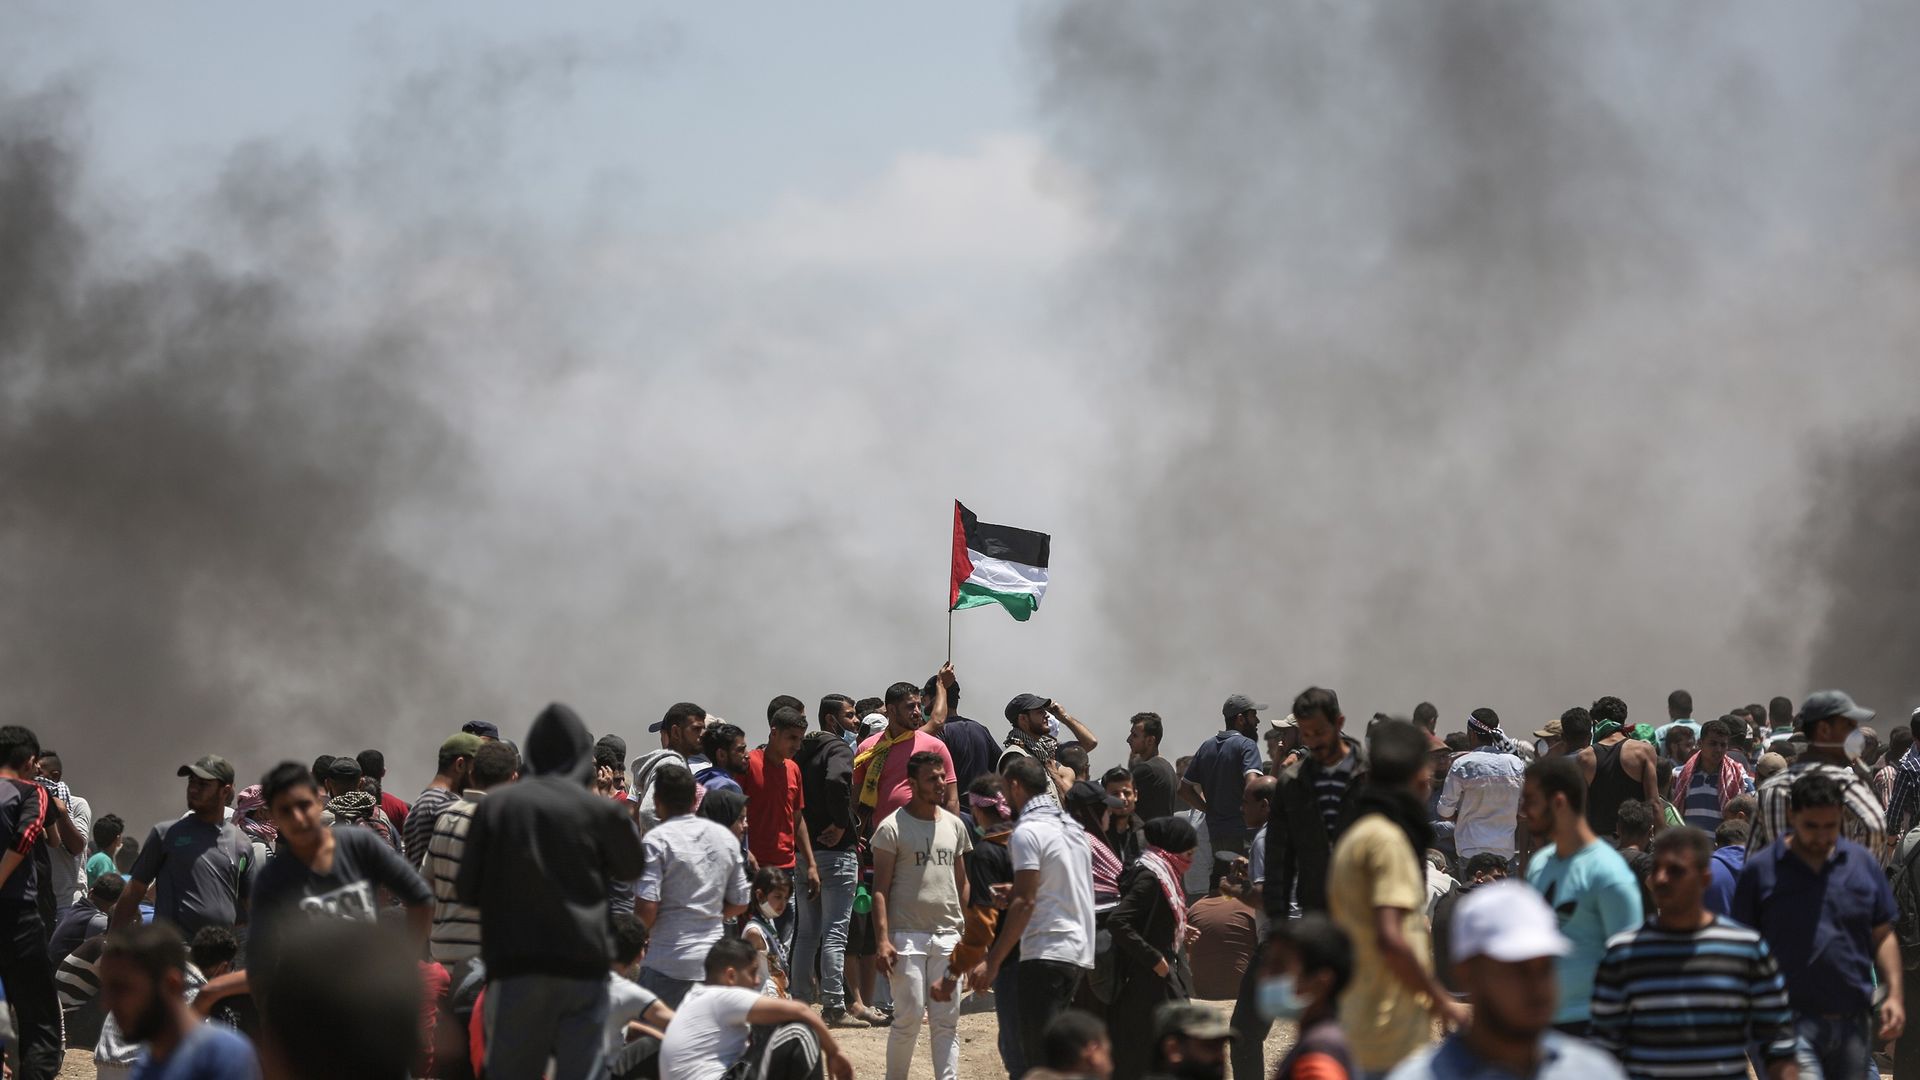 protesters along Gaza border with smoke in background